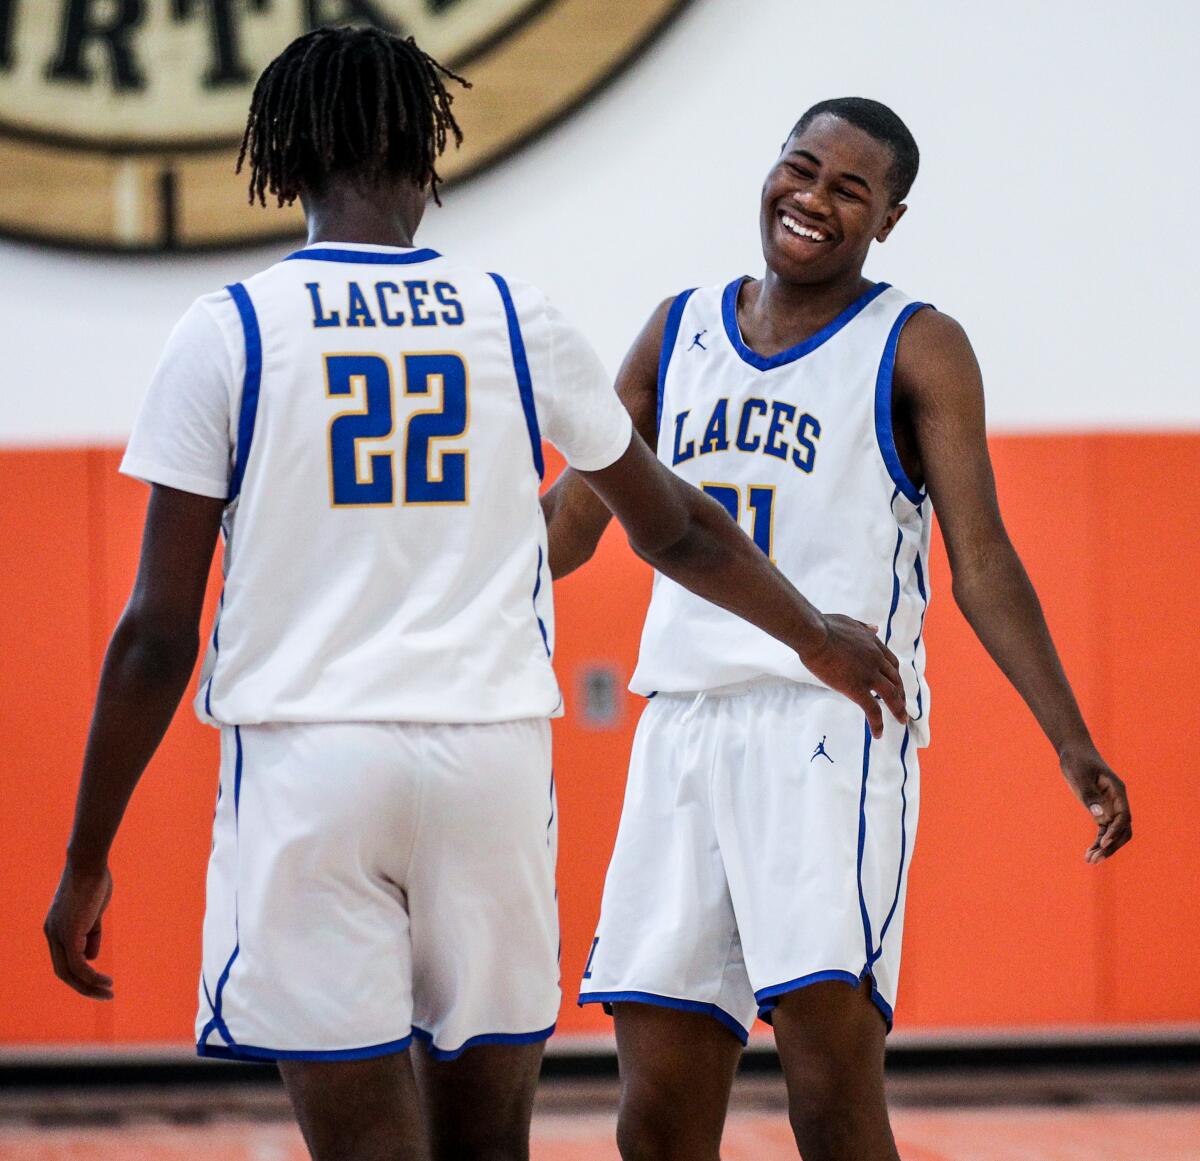 Emmanuel Duru, right, smiles as he receives encouragement from LACES teammate Joshua Sangster.